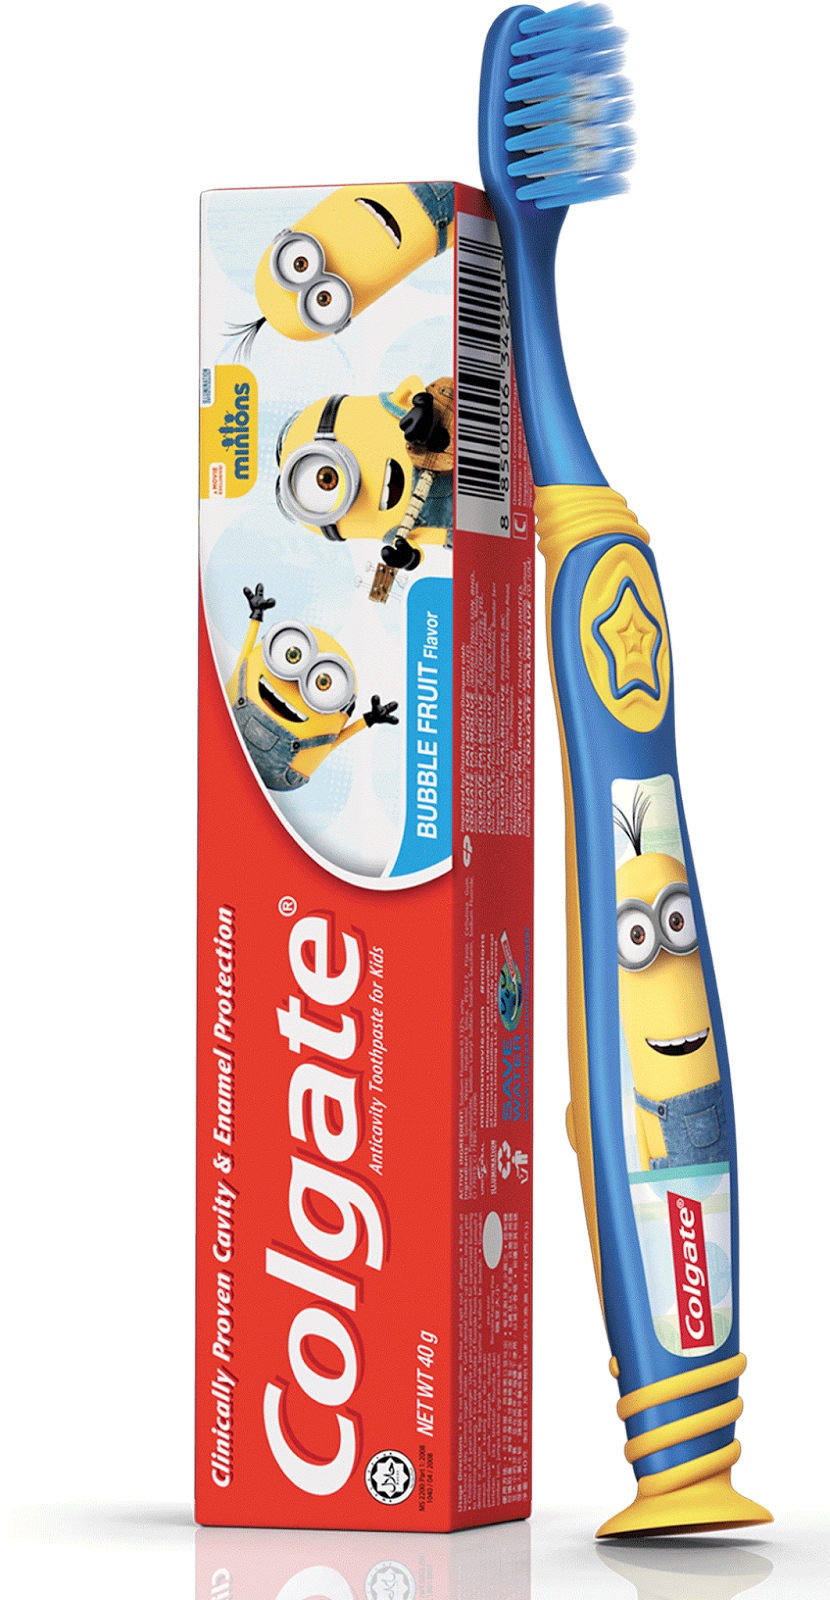 These are our minions to improve our oral care #oralcaretips